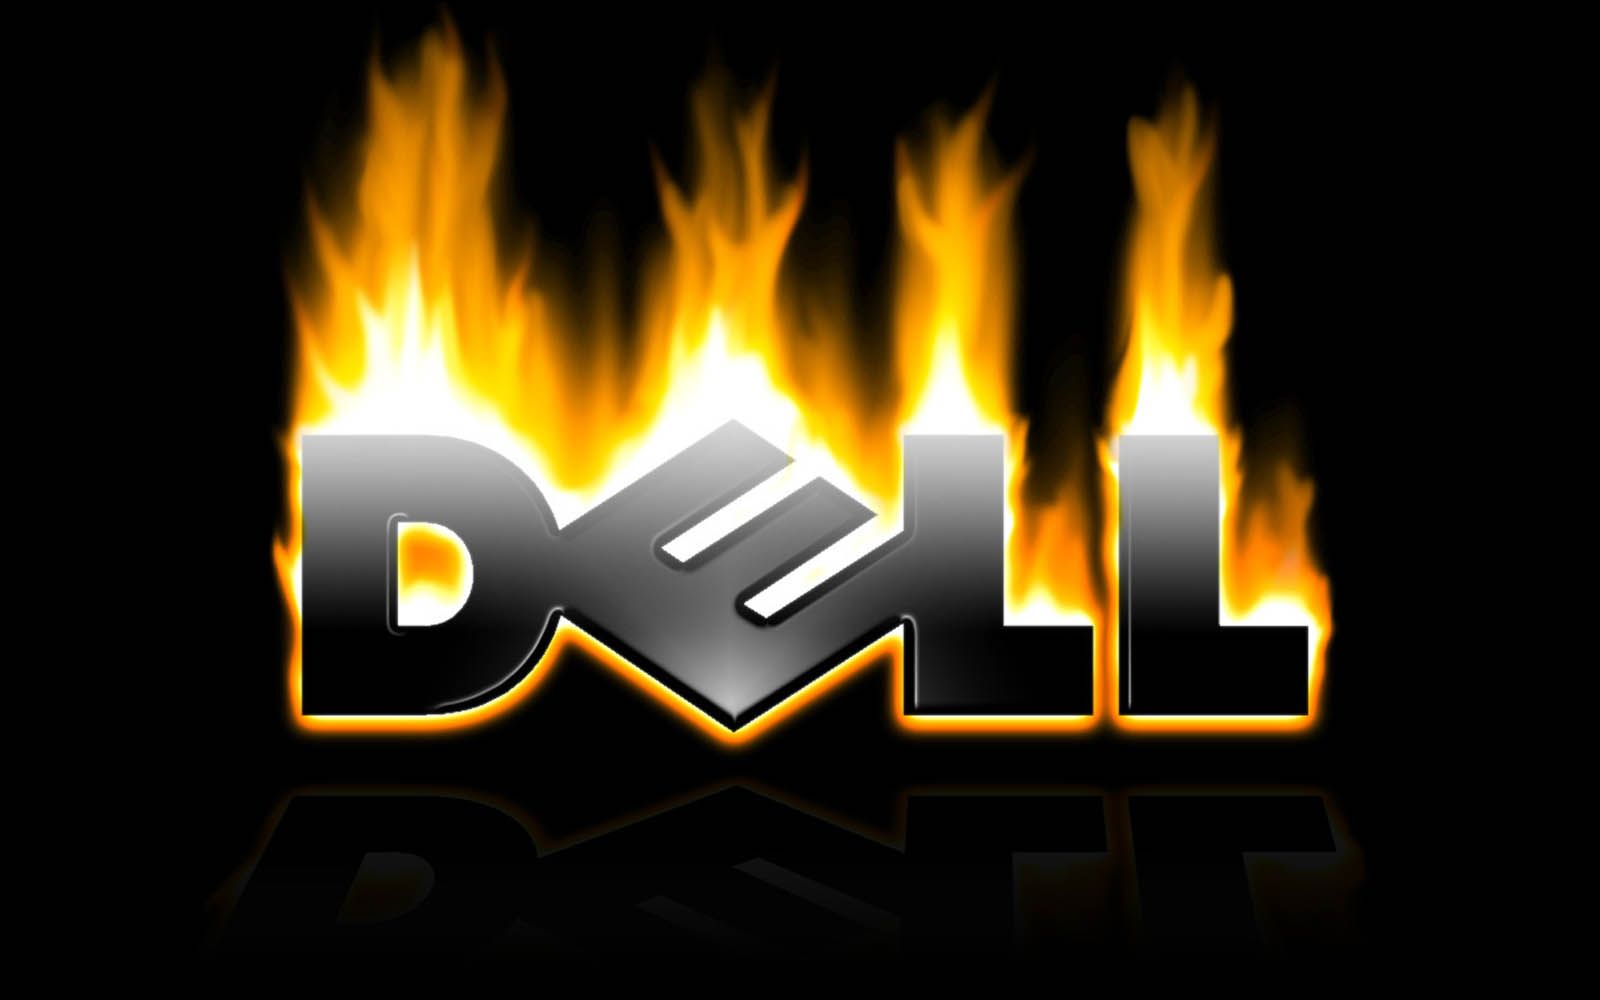 Wallpaper Dell Backgrounds